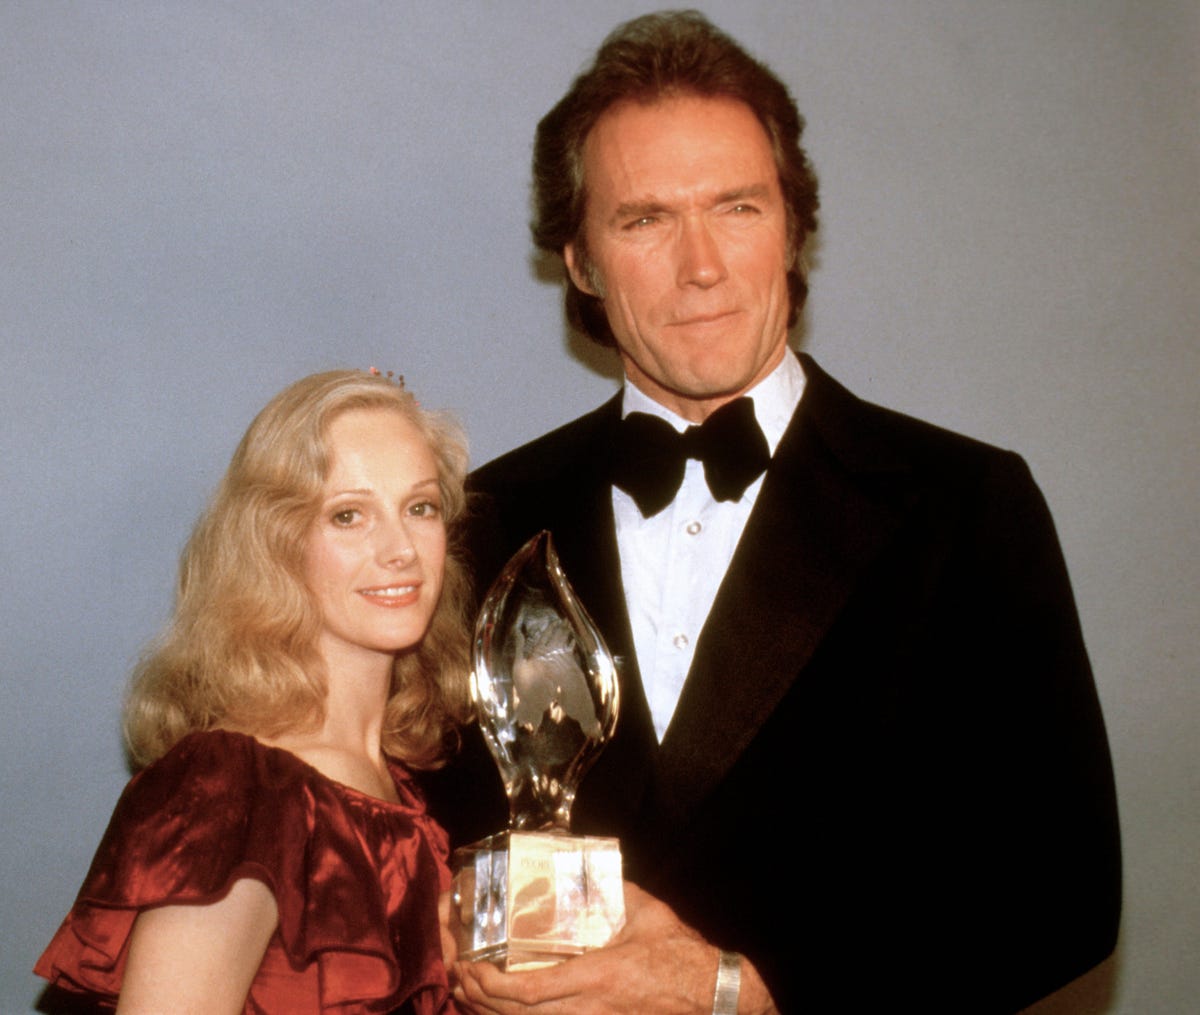 Sondra Locke dies at 74: Tennessee actress starred with Clint Eastwood